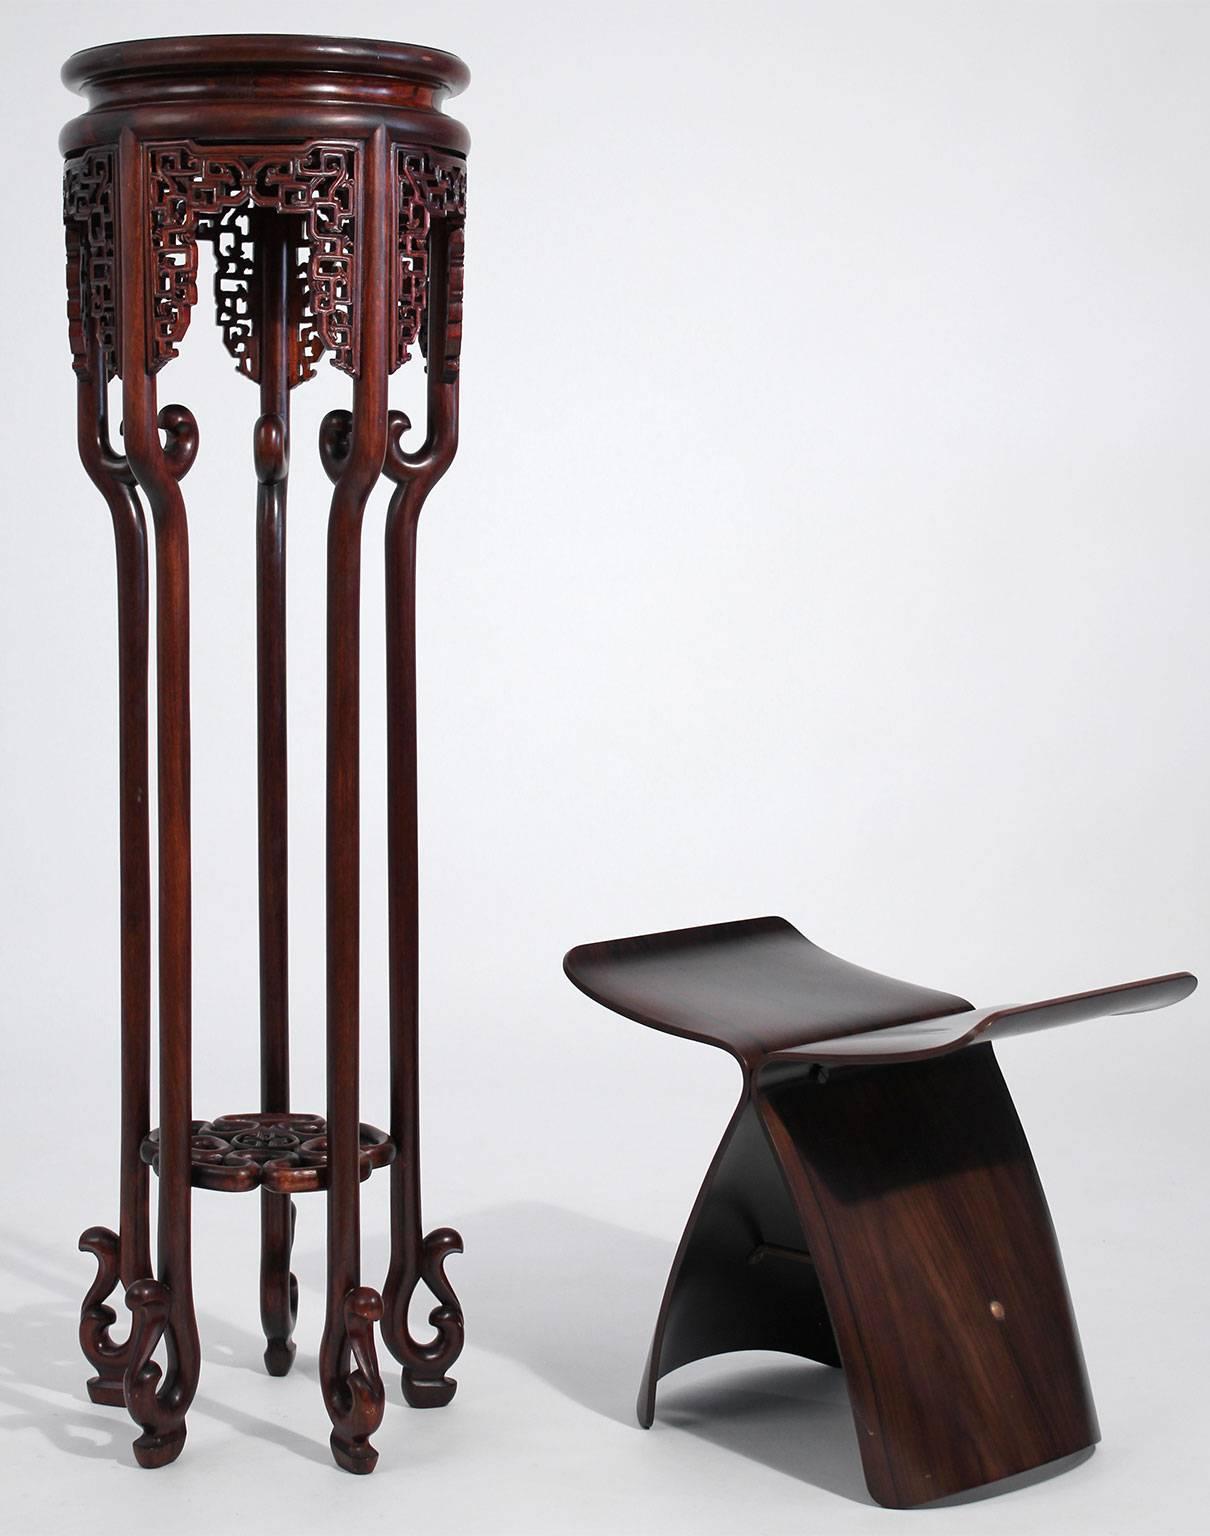 Antique Chinese carved rosewood floor plant stand. Heavily hand-carved and measures 43 3/4